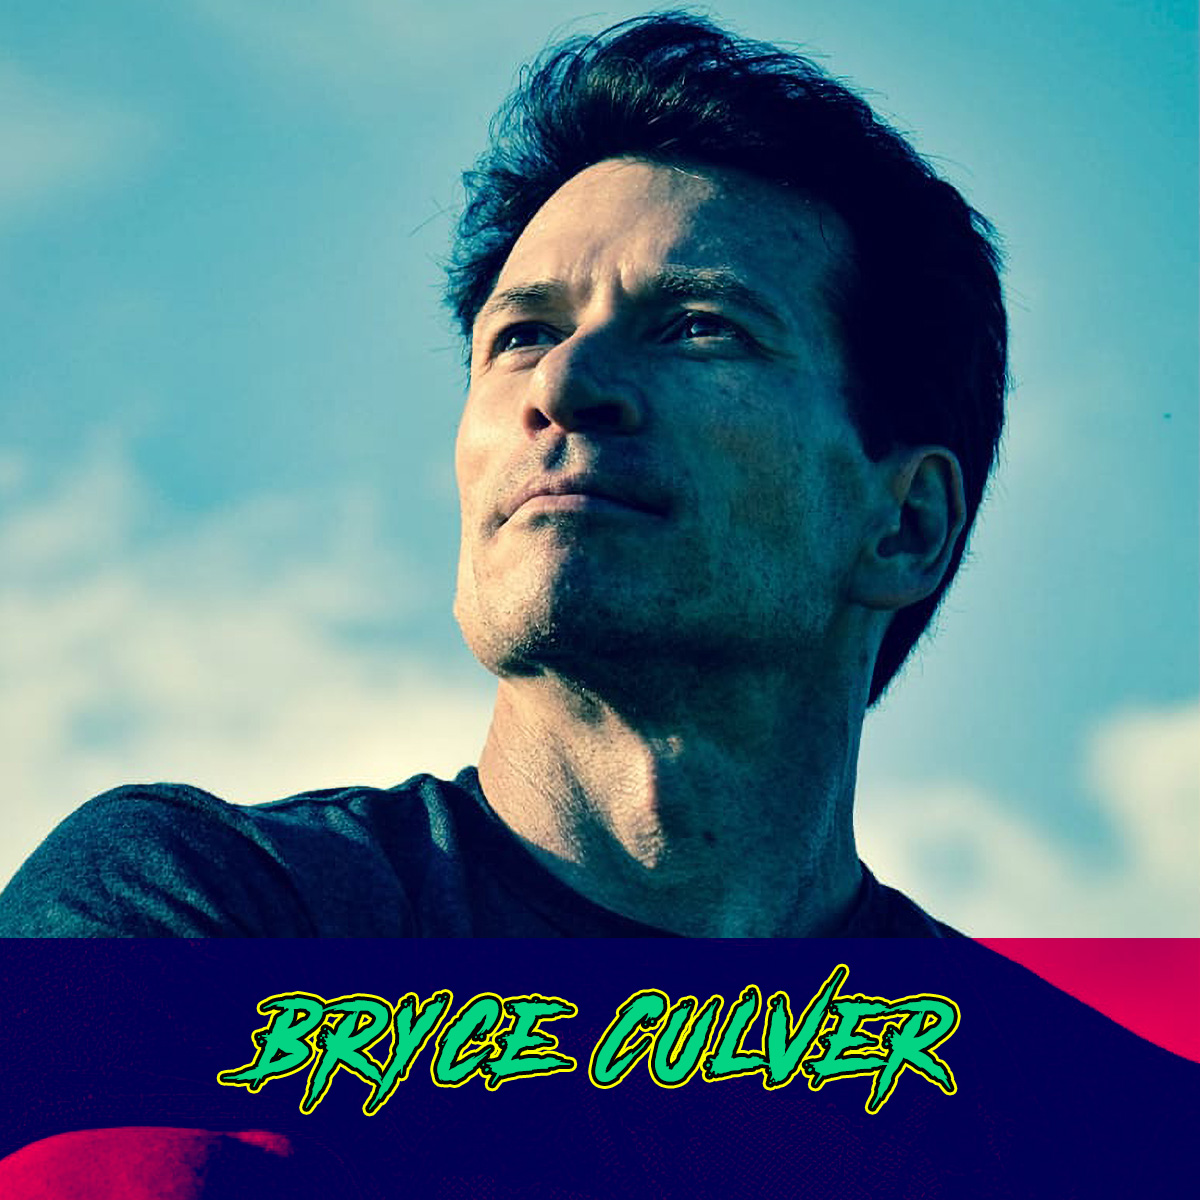 Cast Announcement #14! Welcome cosplayer extraordinaire, Bryce Culver. Bryce specializes in several types of cosplay from Horror themed to Star Trek. We're glad to welcome him on board!

#Filmmaker #FilmTexas #SupportIndieFilm